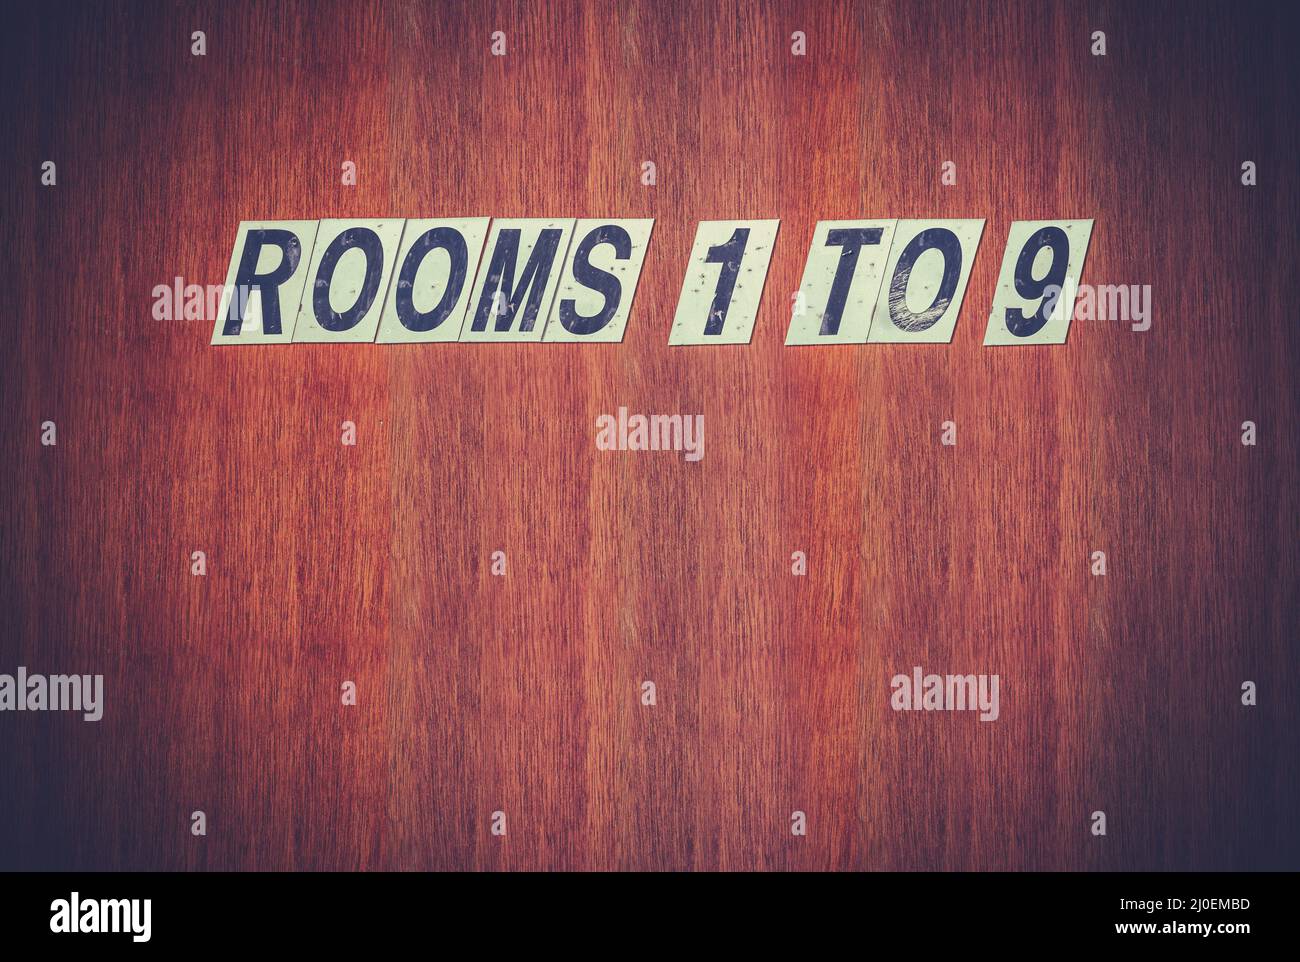 Grungy Hotel Rooms Sign Stock Photo